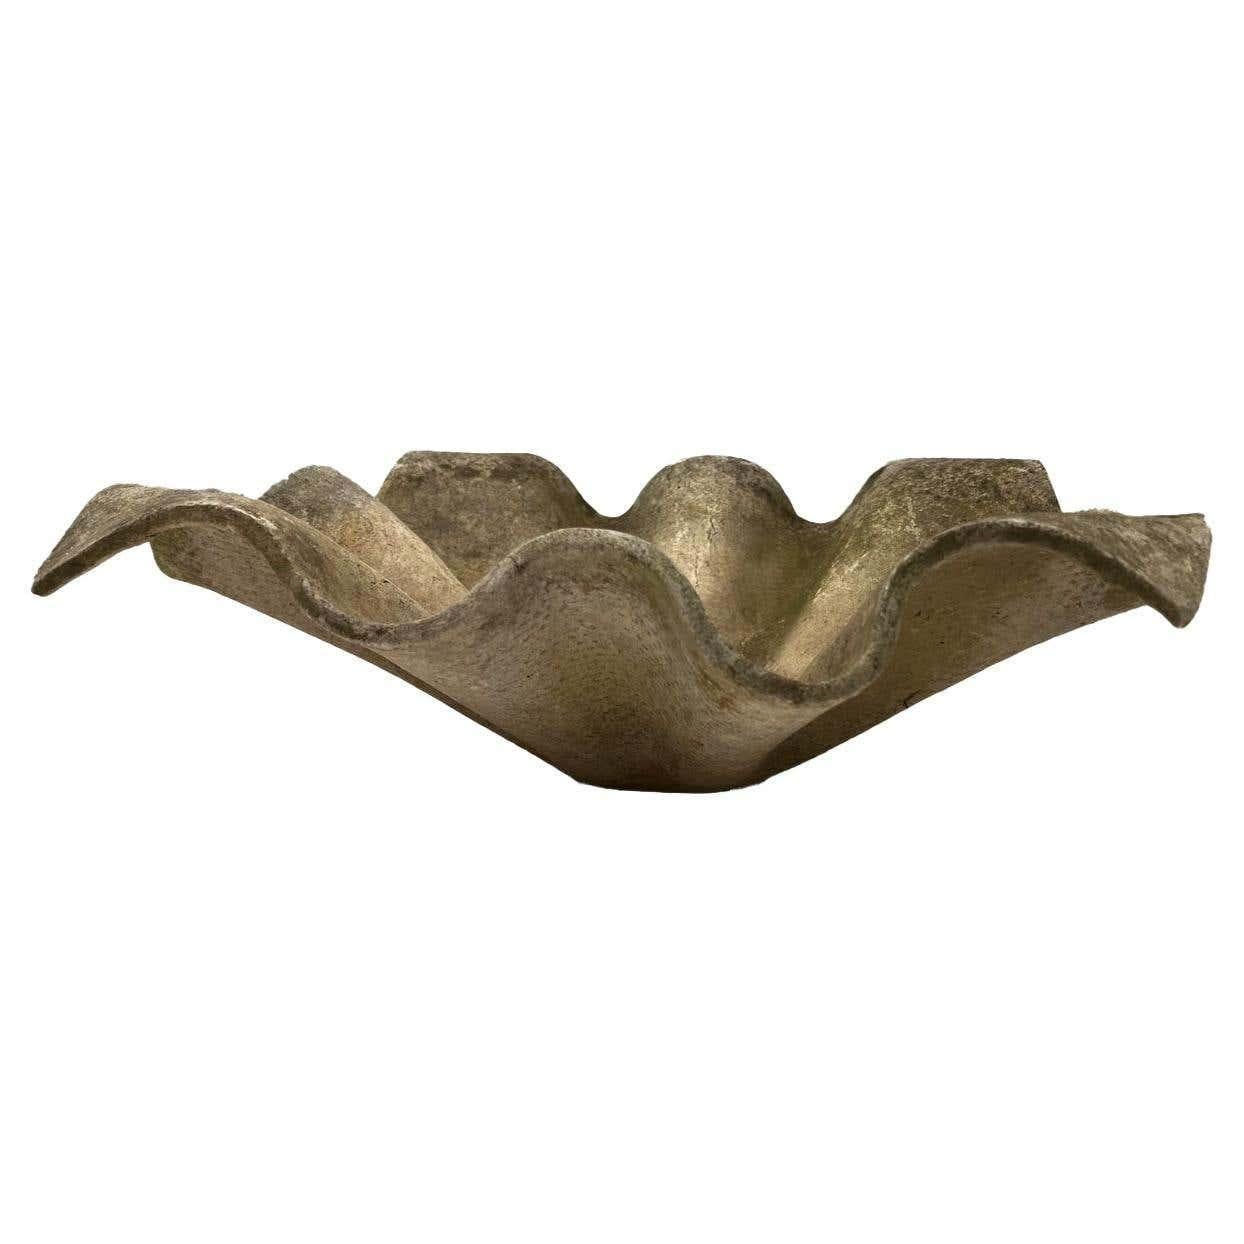 Willy Guhl was a famous Swiss designer who created planters in many shapes. These are formed from a slab of Eternit (a fibrous concrete material) that was molded into a handkerchief shape.